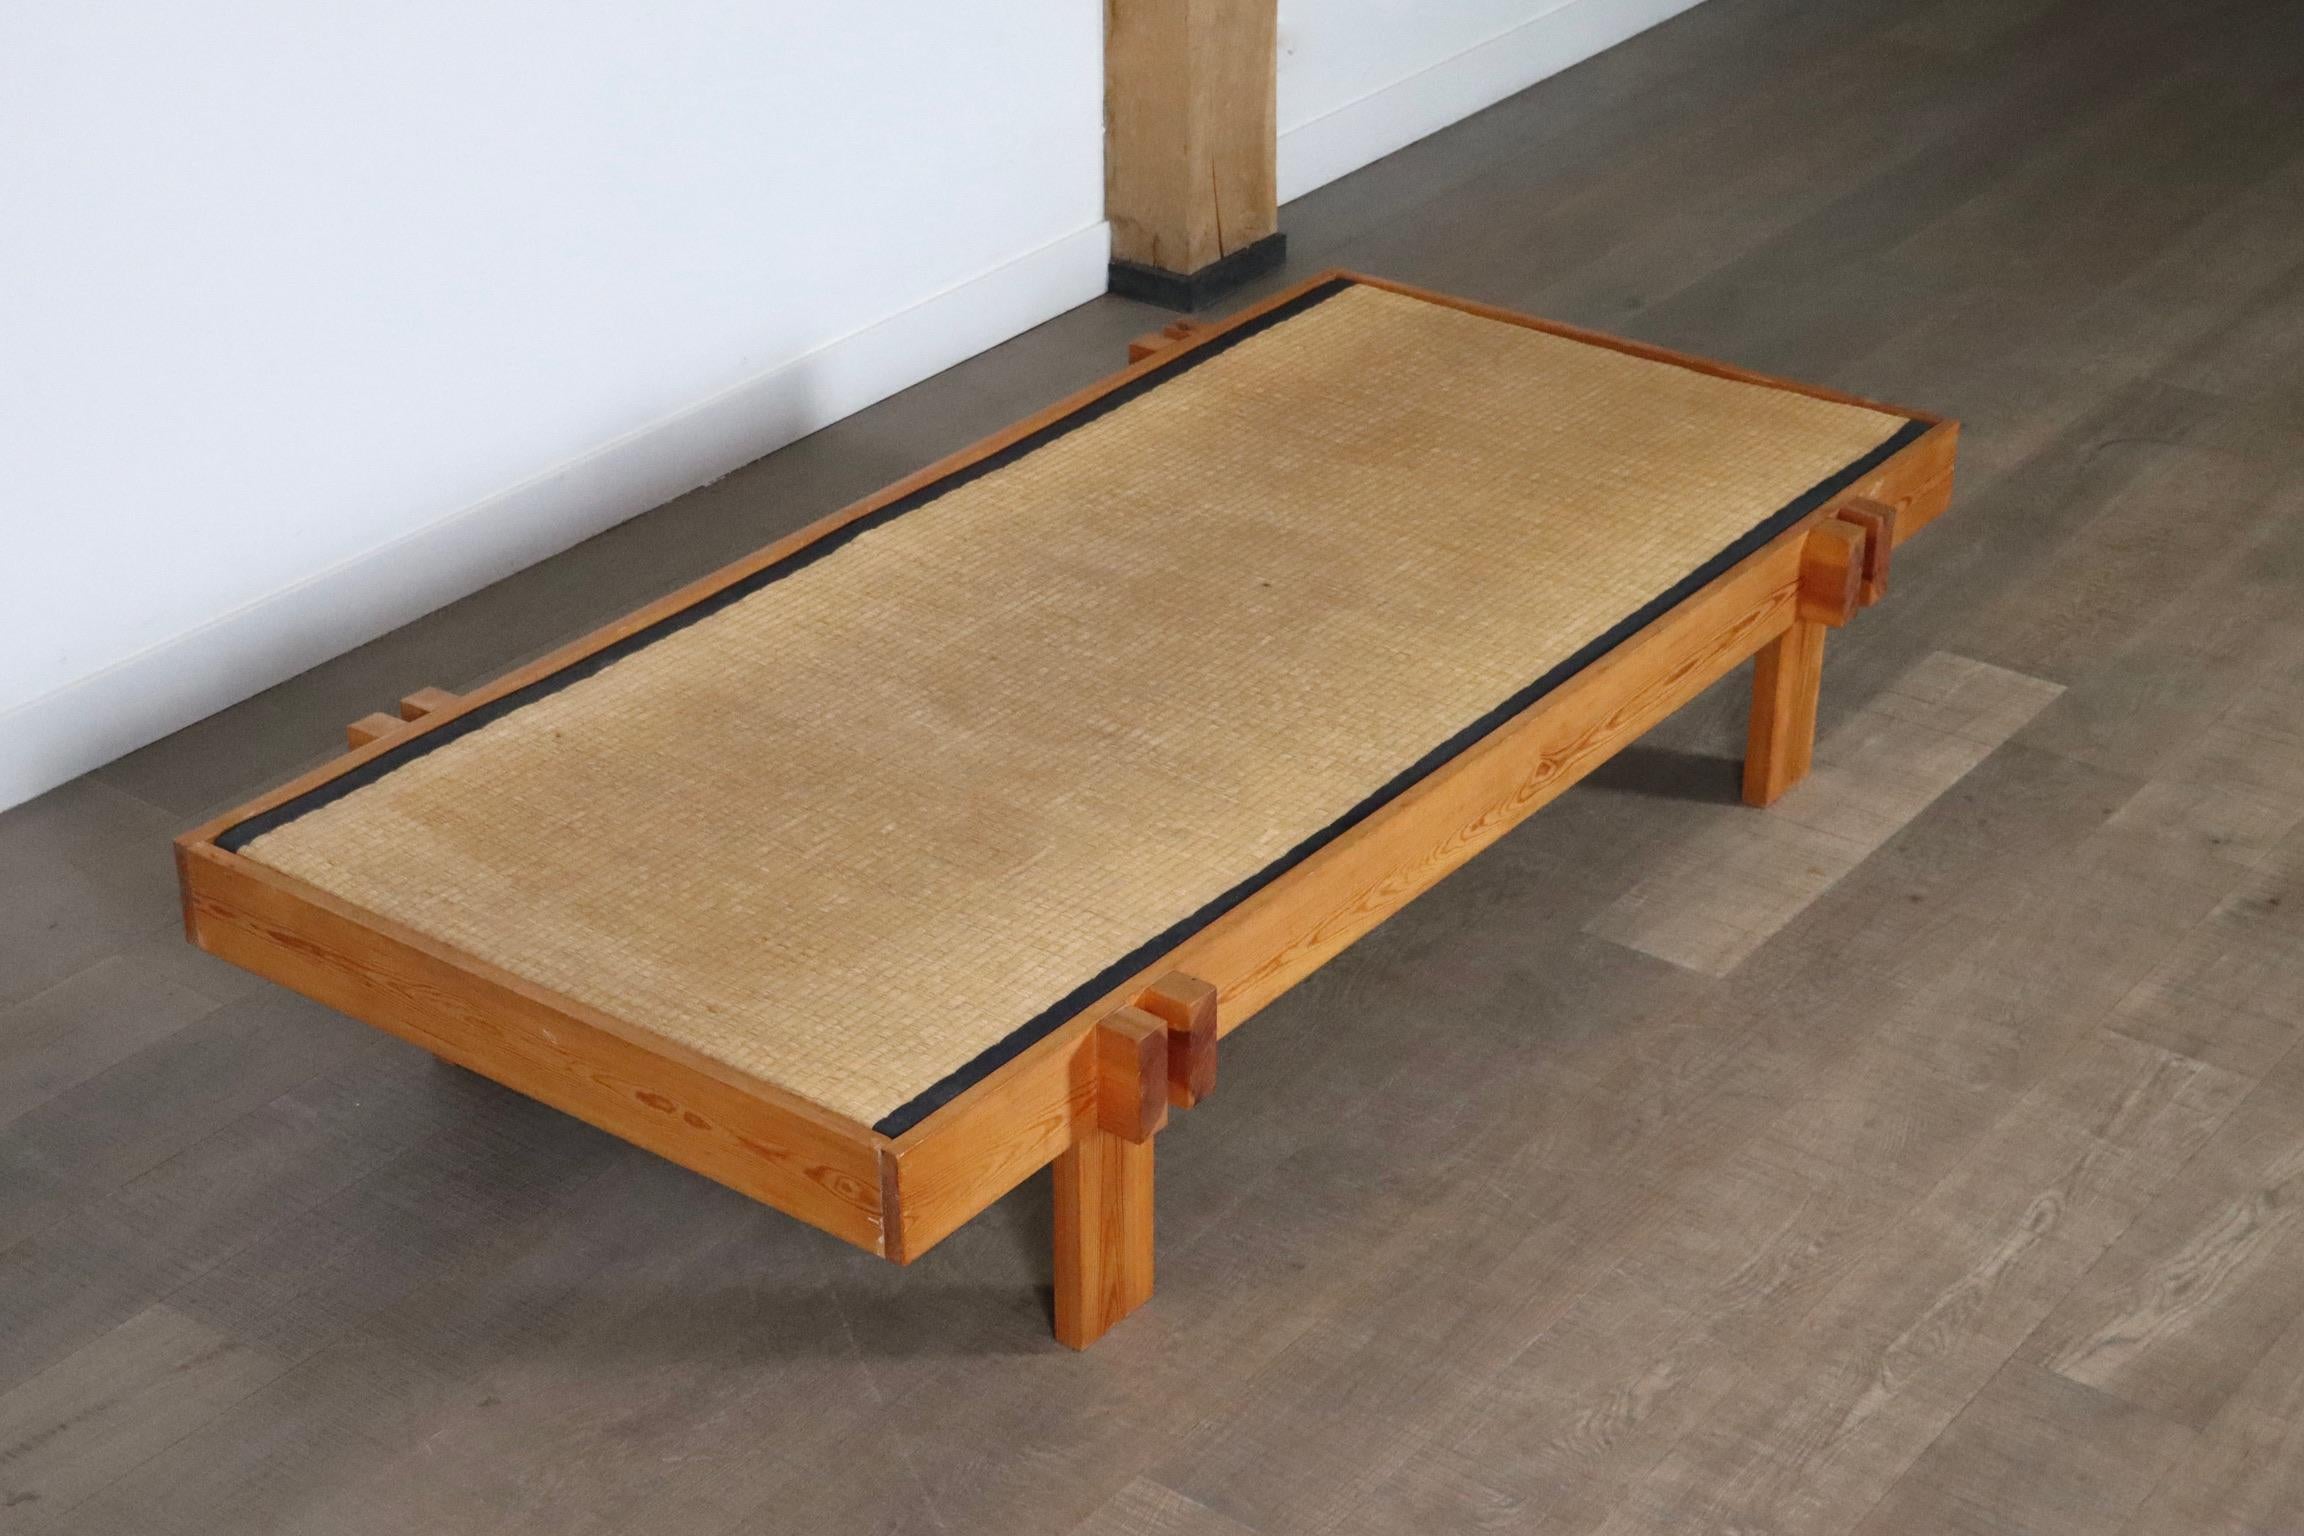 Midcentury Japanese Coffee Table In Wood And Seagrass, Japan, 1960s For Sale 3